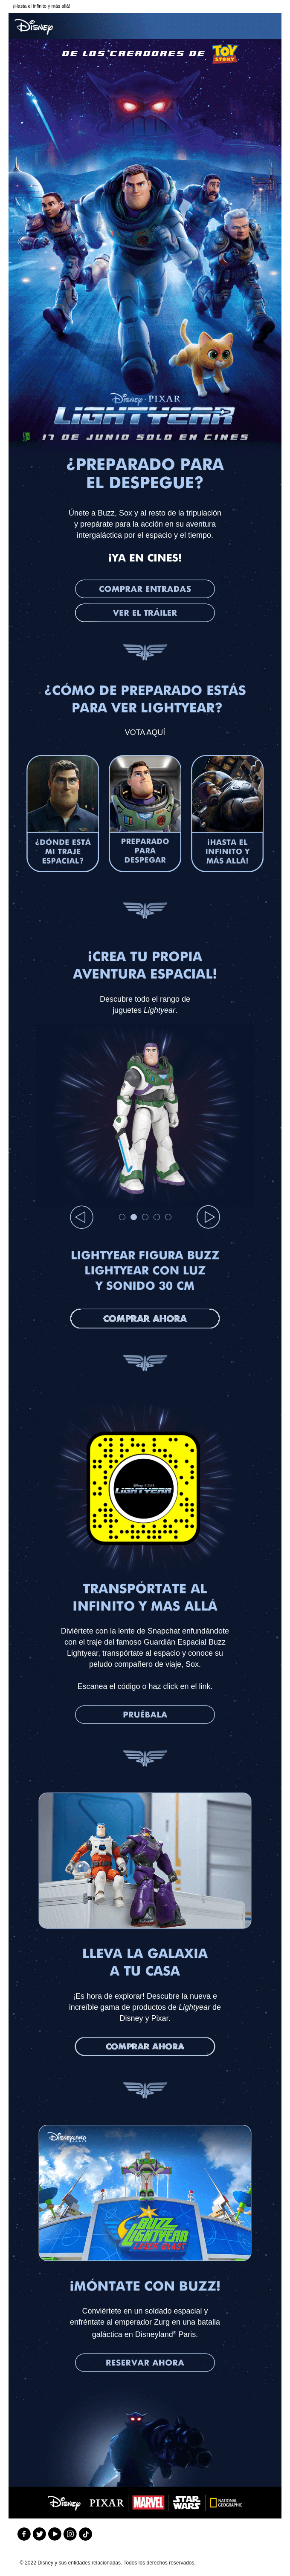 Lightyear, from Disney and Pixar, now in theaters!